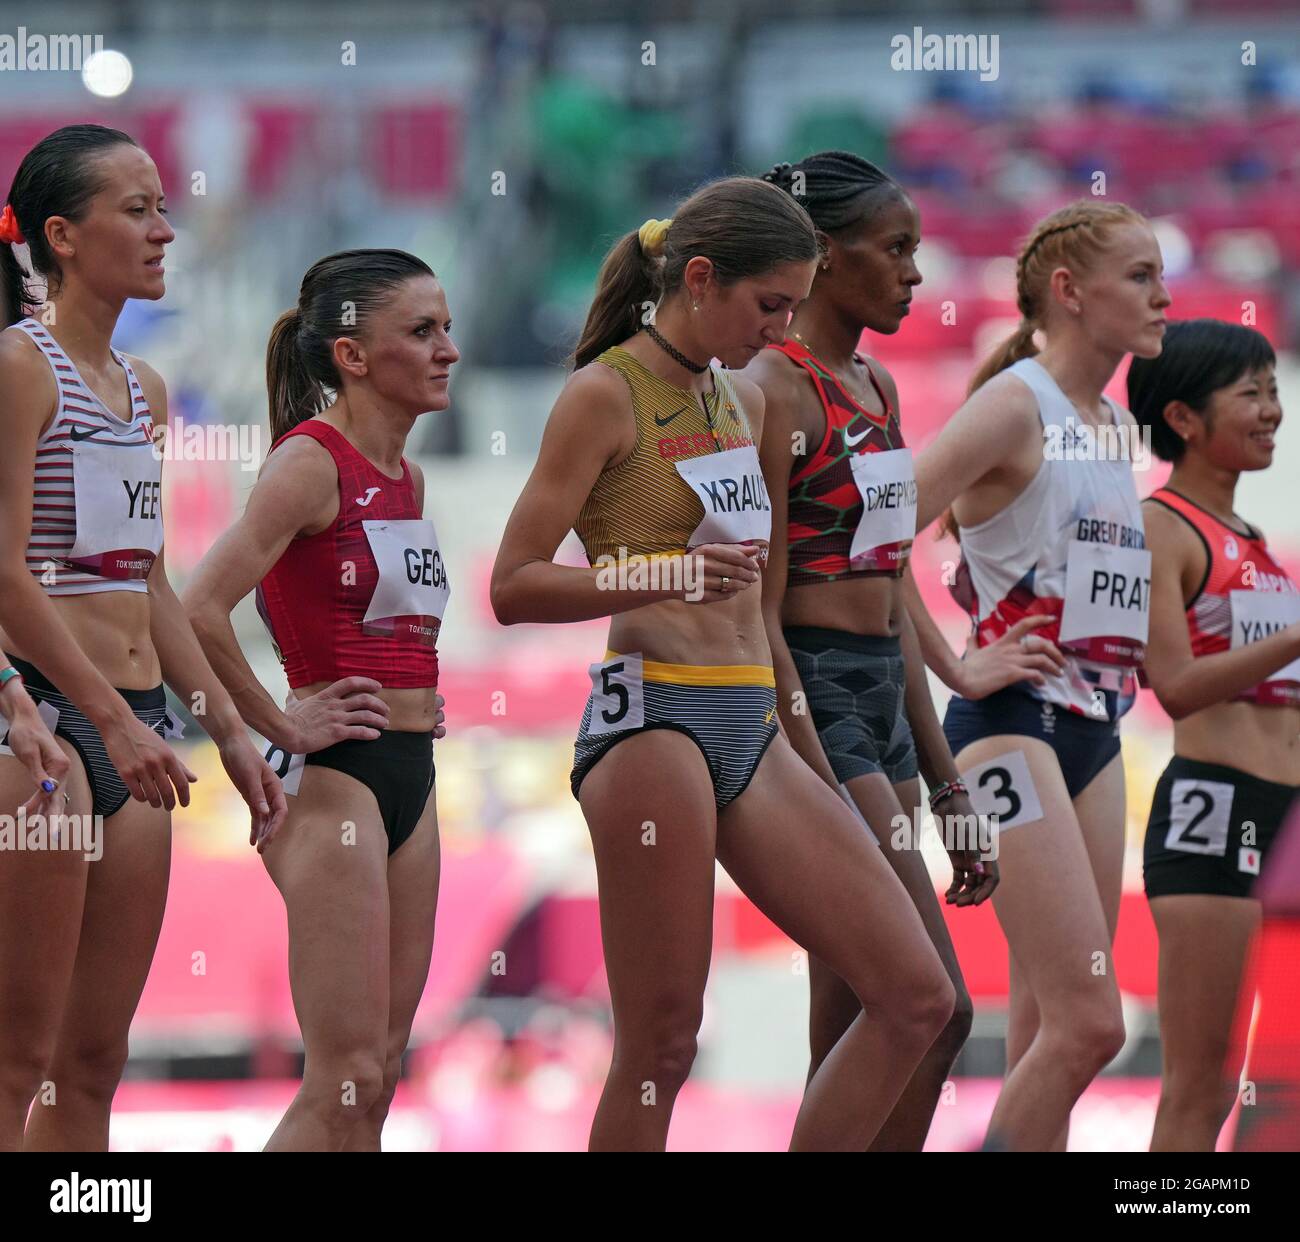 1st August 2021; Olympic Stadium, Tokyo, Japan: Tokyo 2020 Olympic summer games day 9; Womens 3000m steeplechase heats: The start as runners ready themselves including  KRAUSE Gesa Felicitas of Germany and  GEGA Luiza of Albania Stock Photo